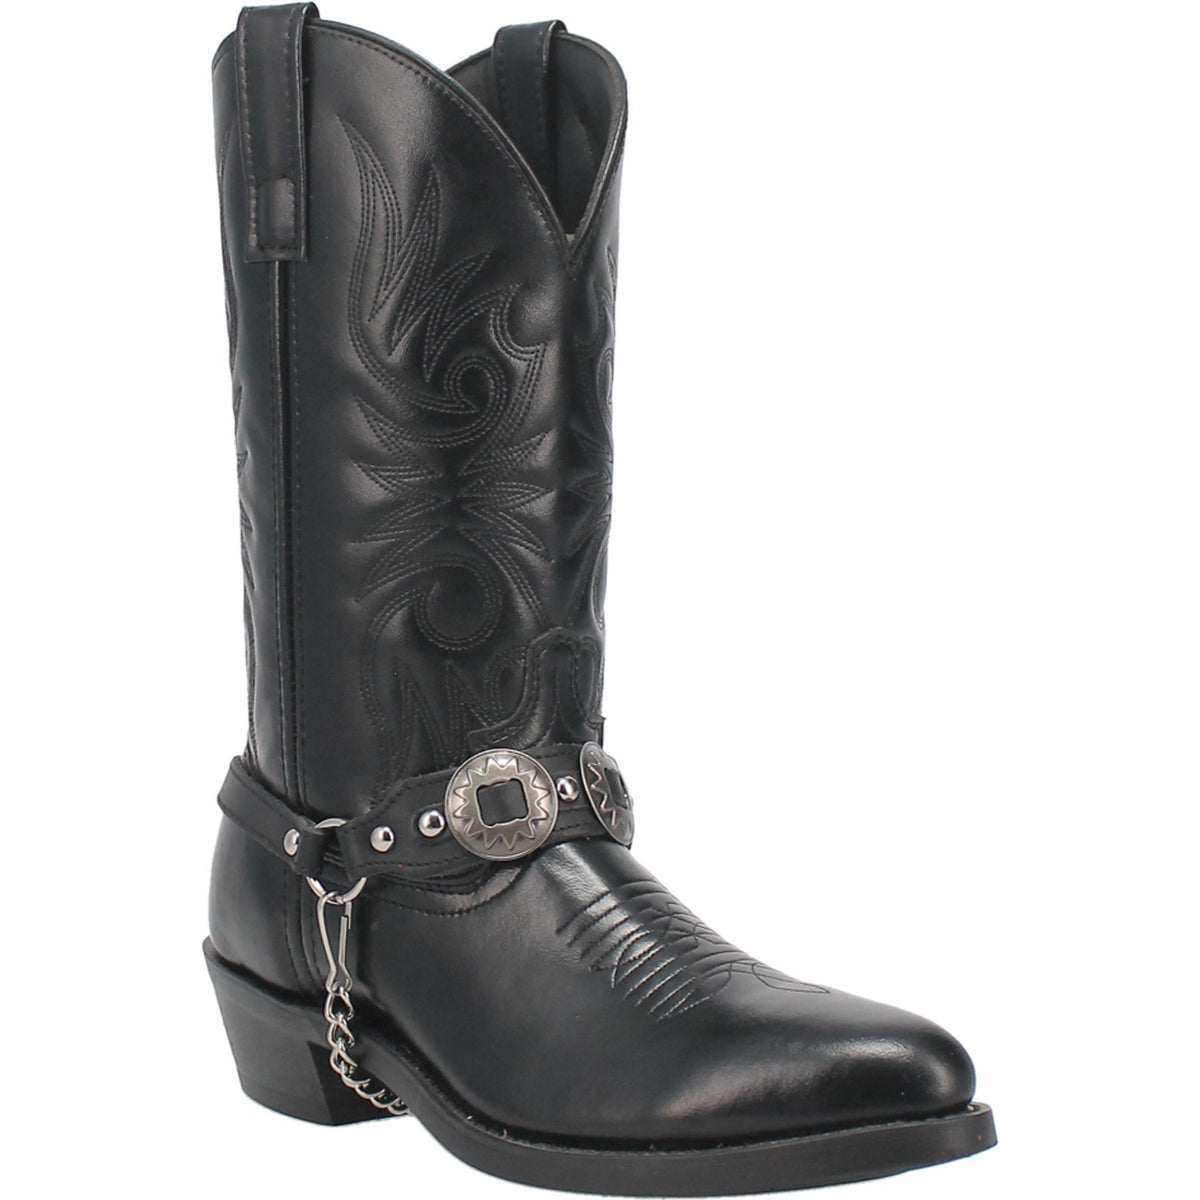 BLACK PEWTER CONCHO STRAP Cover